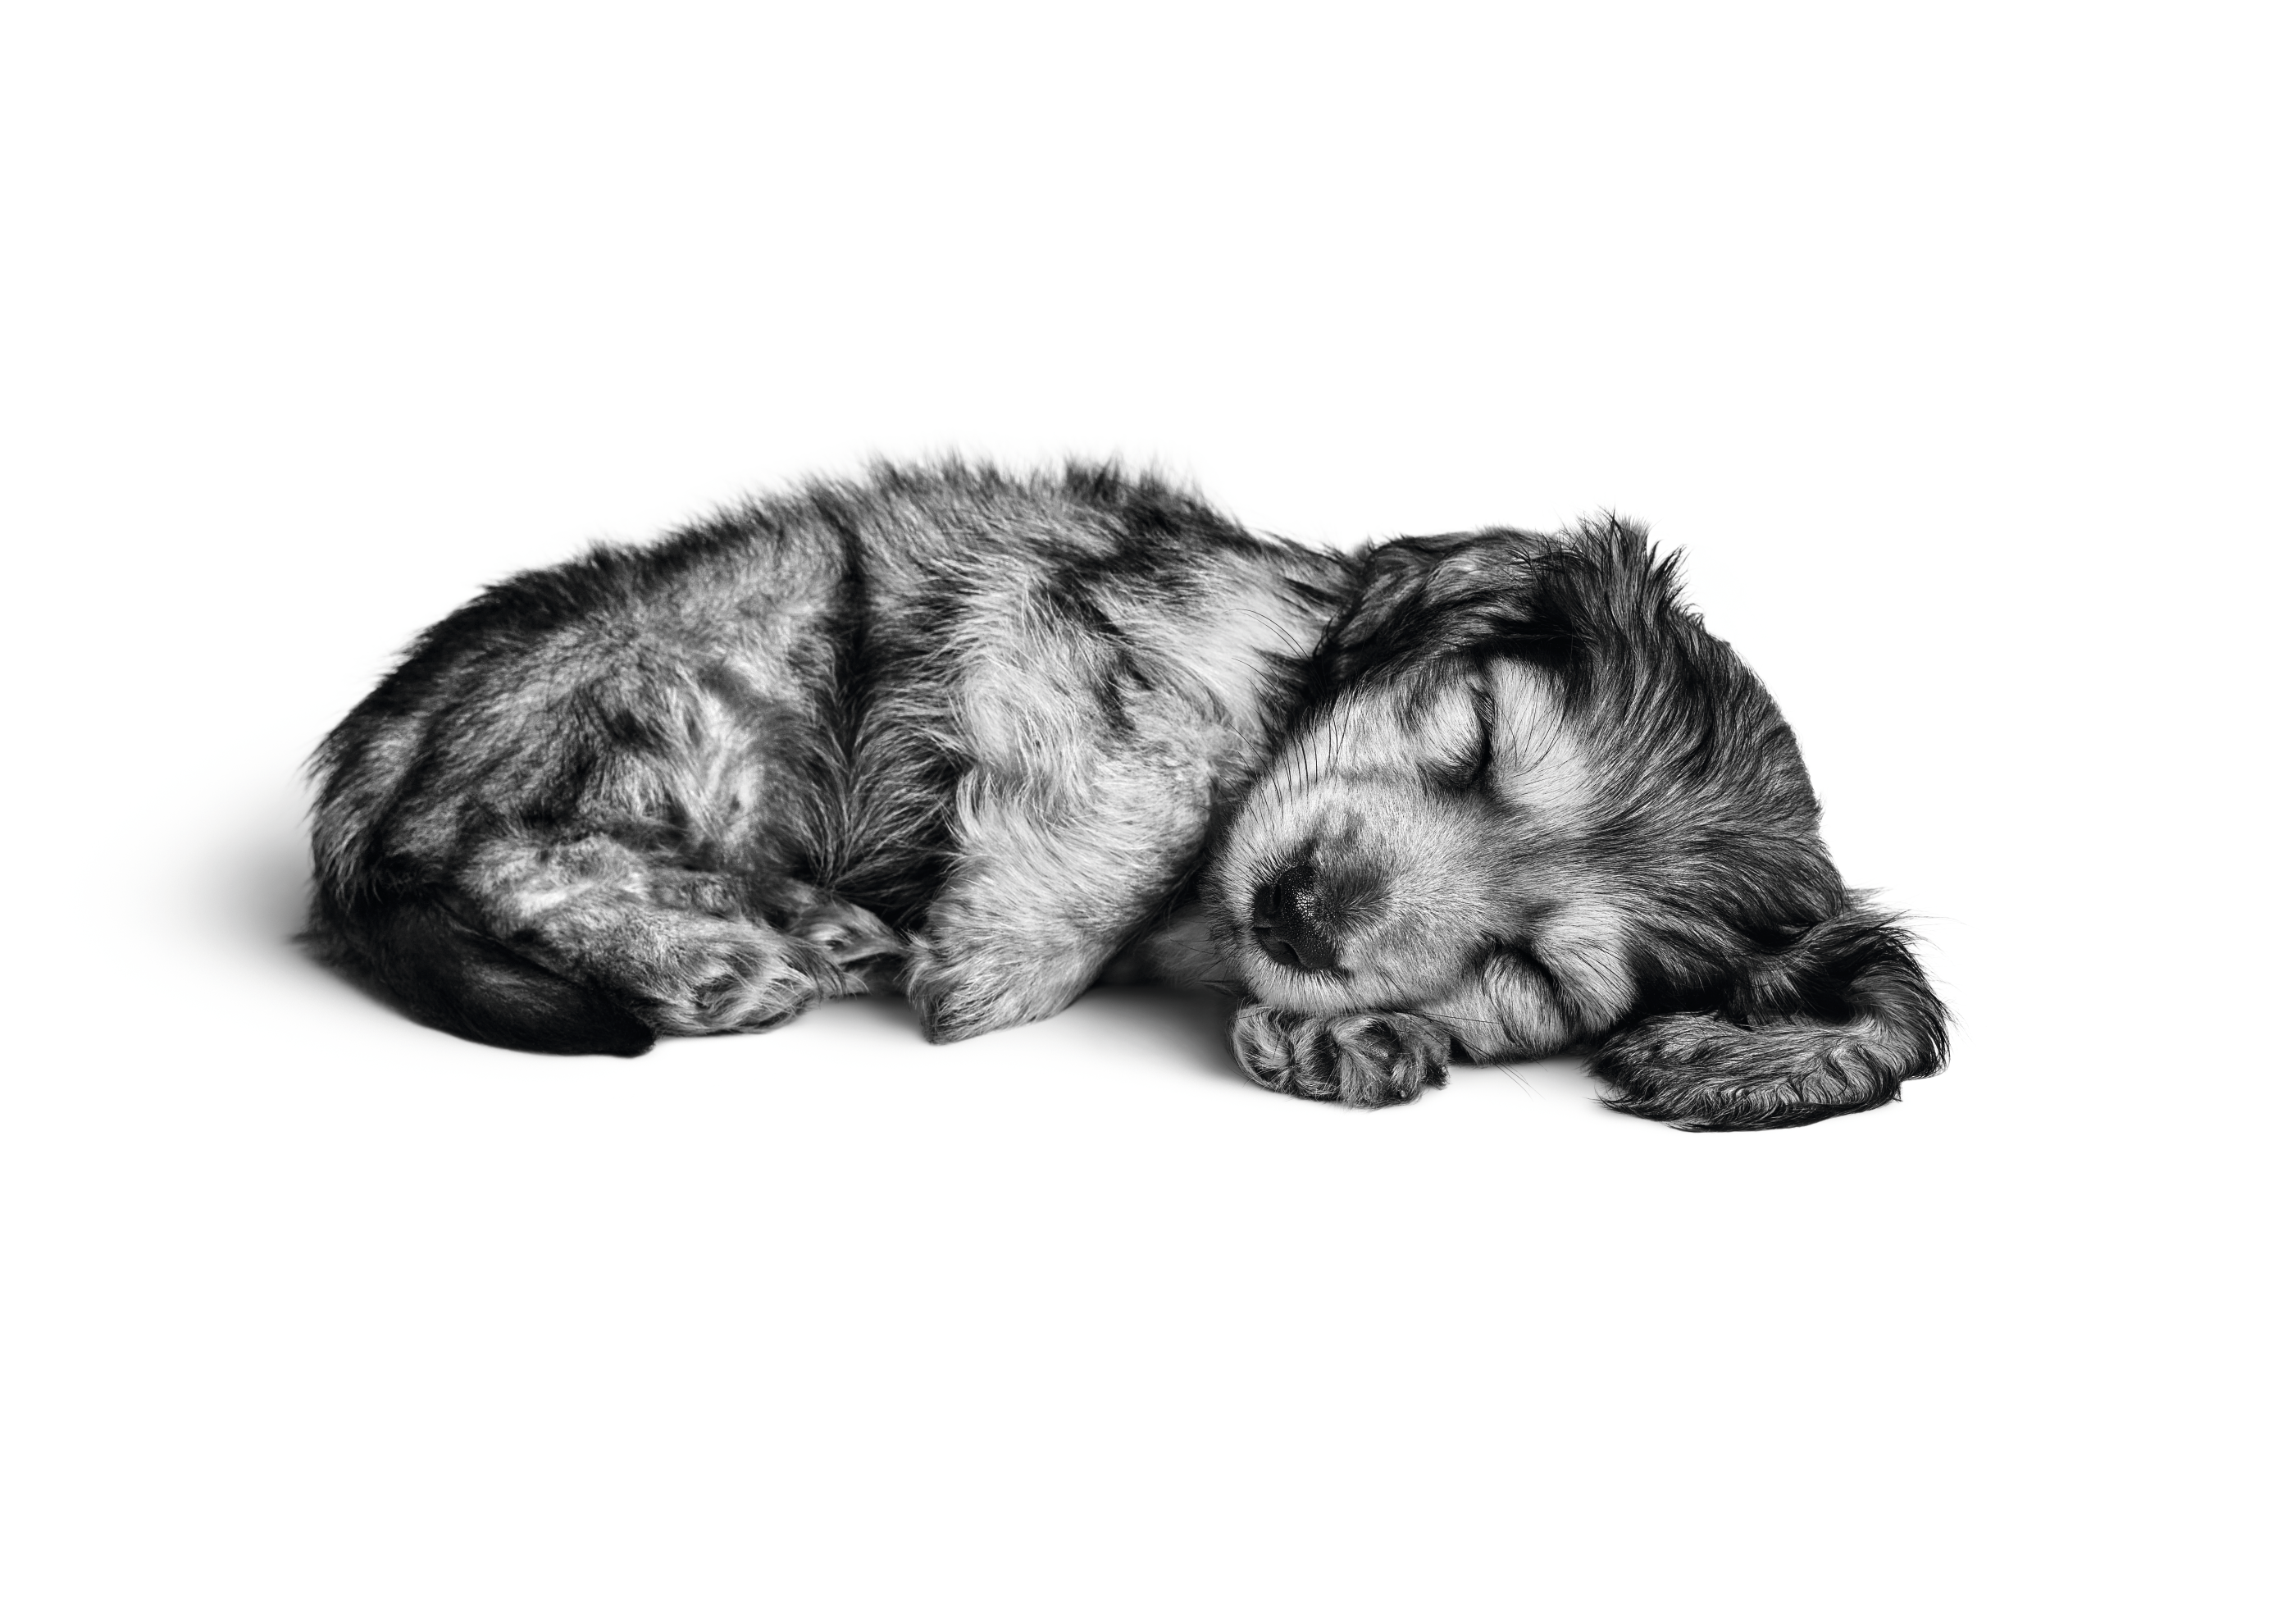 Black and white puppy sleeping